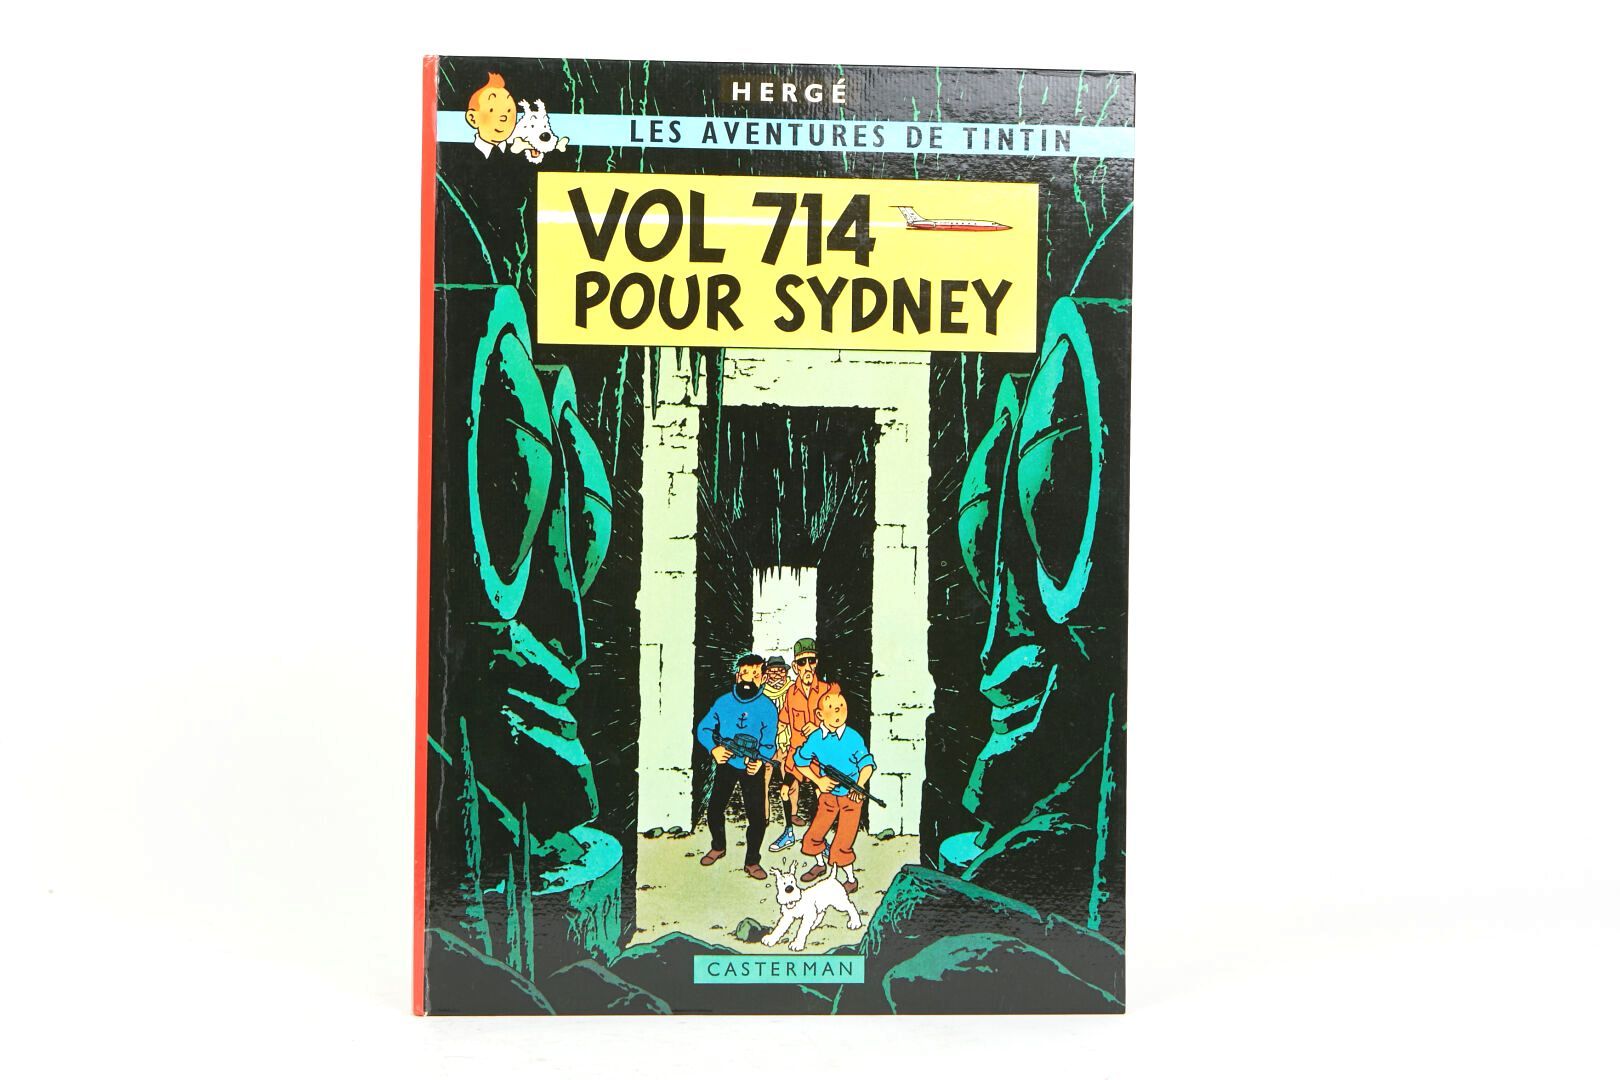 Null "Flight 714 to Sydney" 1968
Page 42 "Are you going to tell me in which brig&hellip;